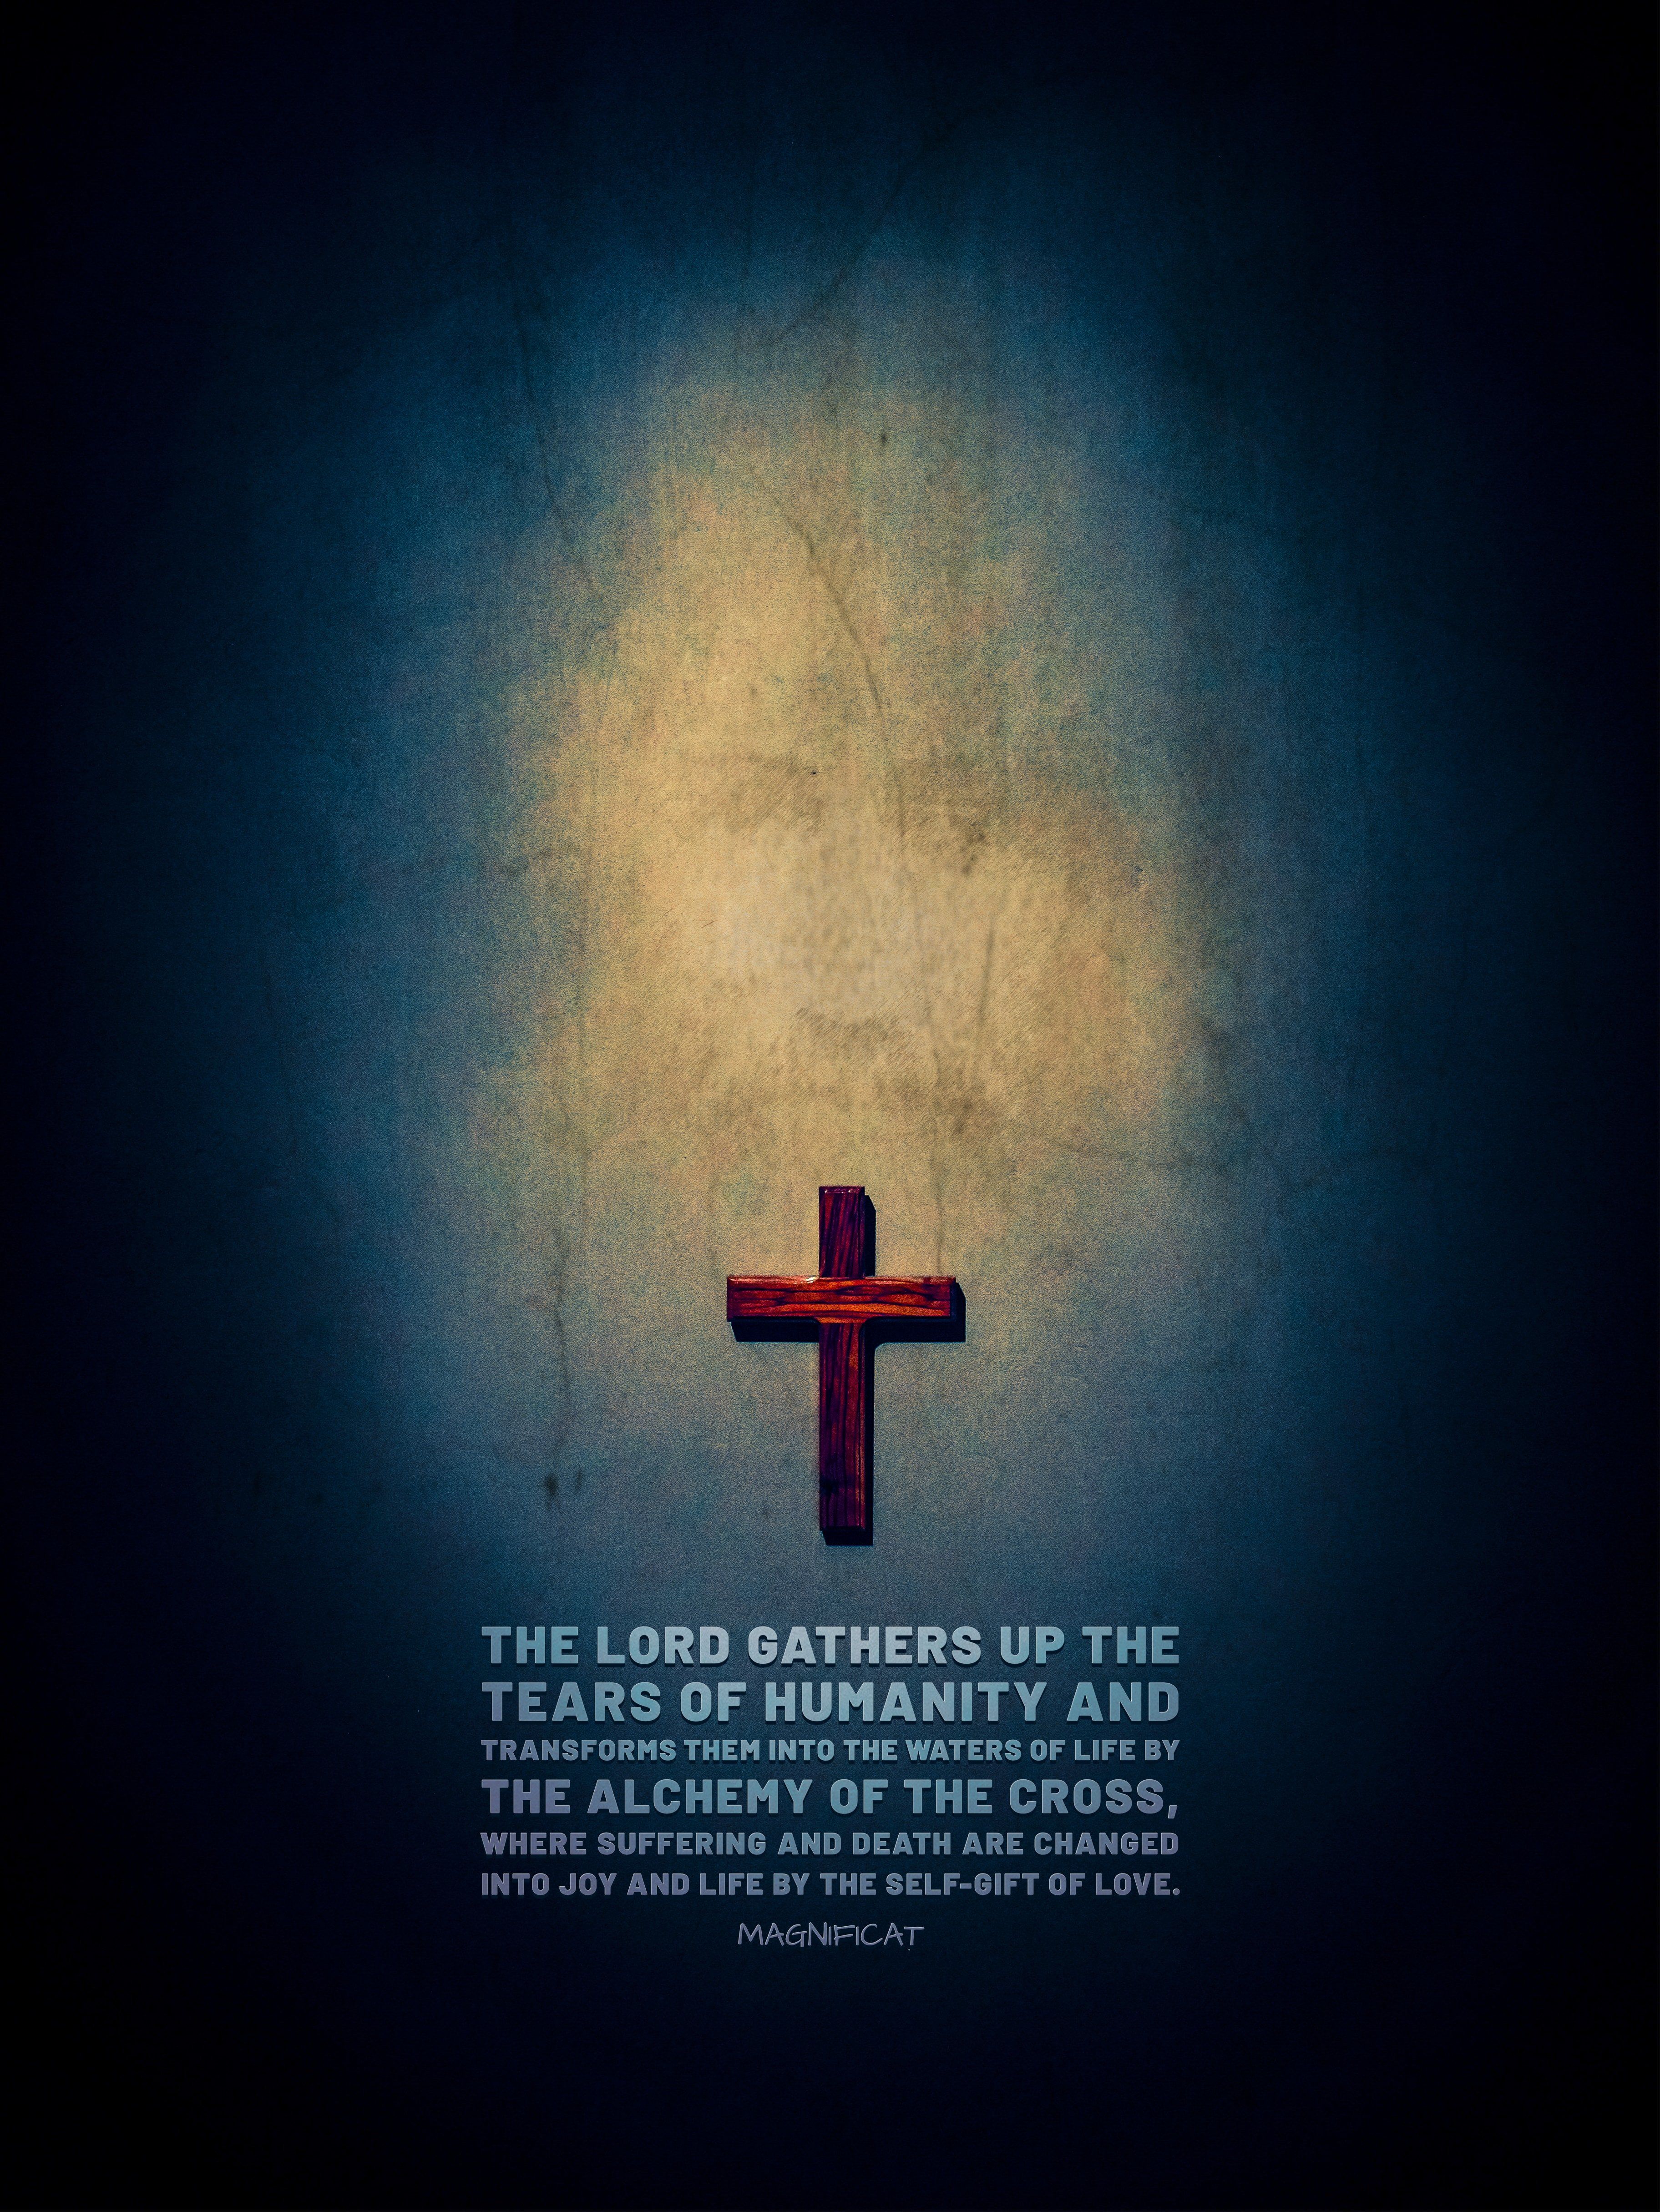 The Alchemy of the Cross Jesus Face Shroud Turin Quote Wallpaper